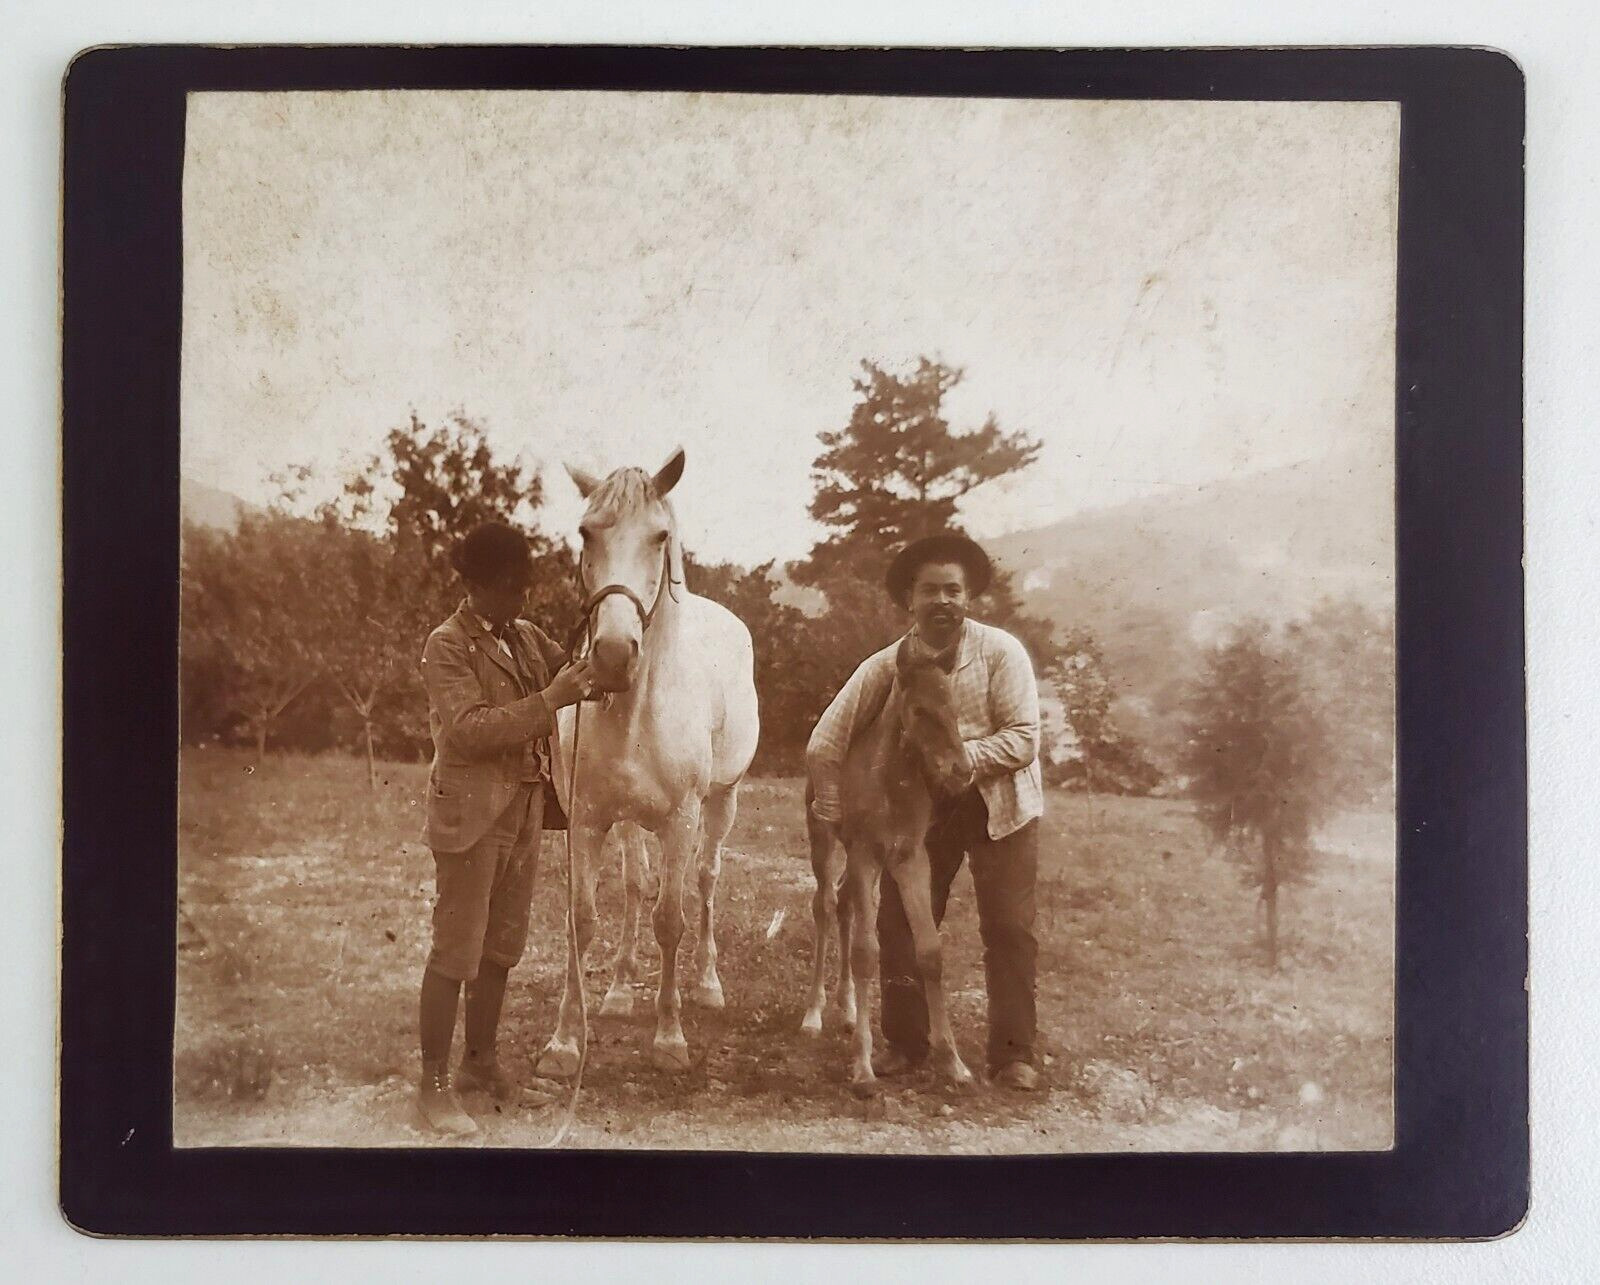 1920s Horse Mare Foal Rural Americana Farmers Countryside Vintage Photograph